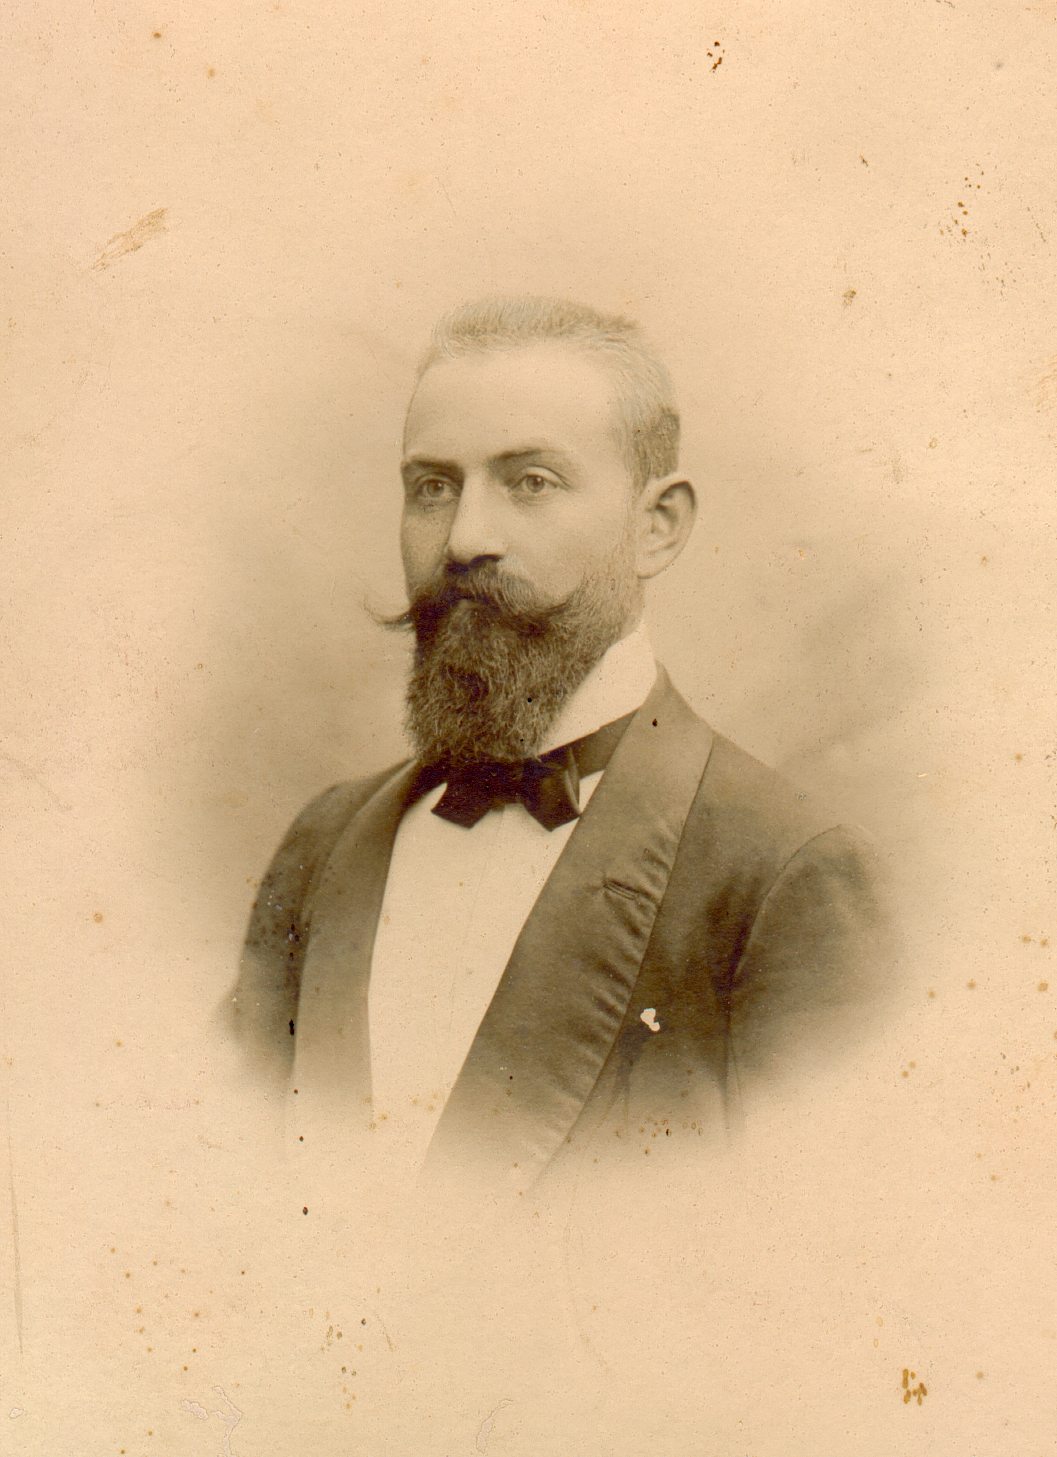 an old pograph of a man with a beard and a suit